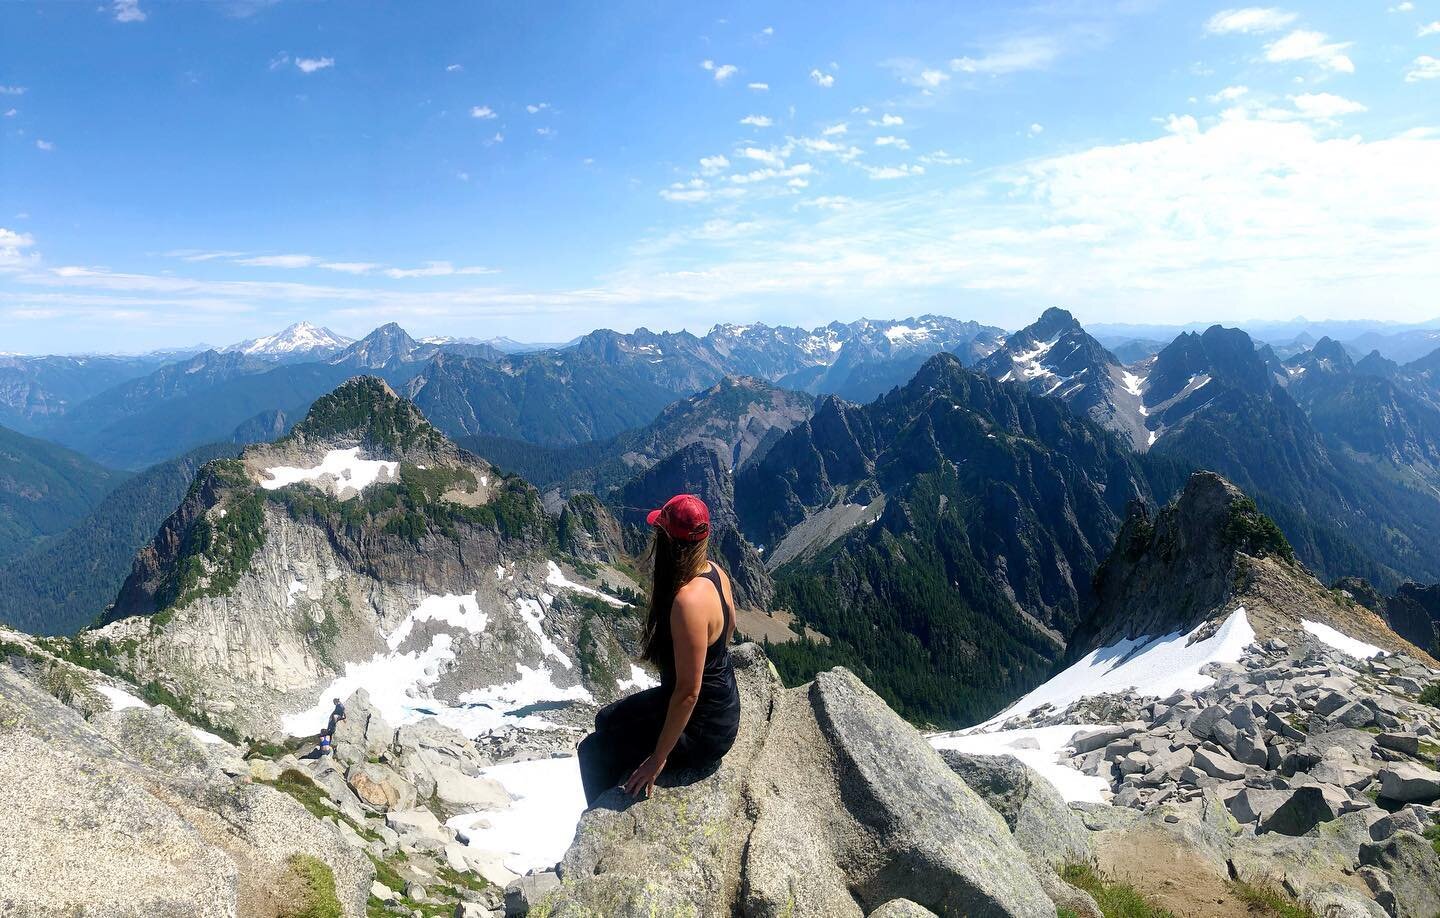 Going to the mountains is going home.
﻿
﻿
﻿#pnwonderland #choosemountains #pnwparadise #pnwdiscovered #thatpnwlife #optoutside #pnwescapes #pacificnorthwest #washington #alltrails #wildernessculture #womenwhoexplore #peoplewhoadventure #ourplanetdail